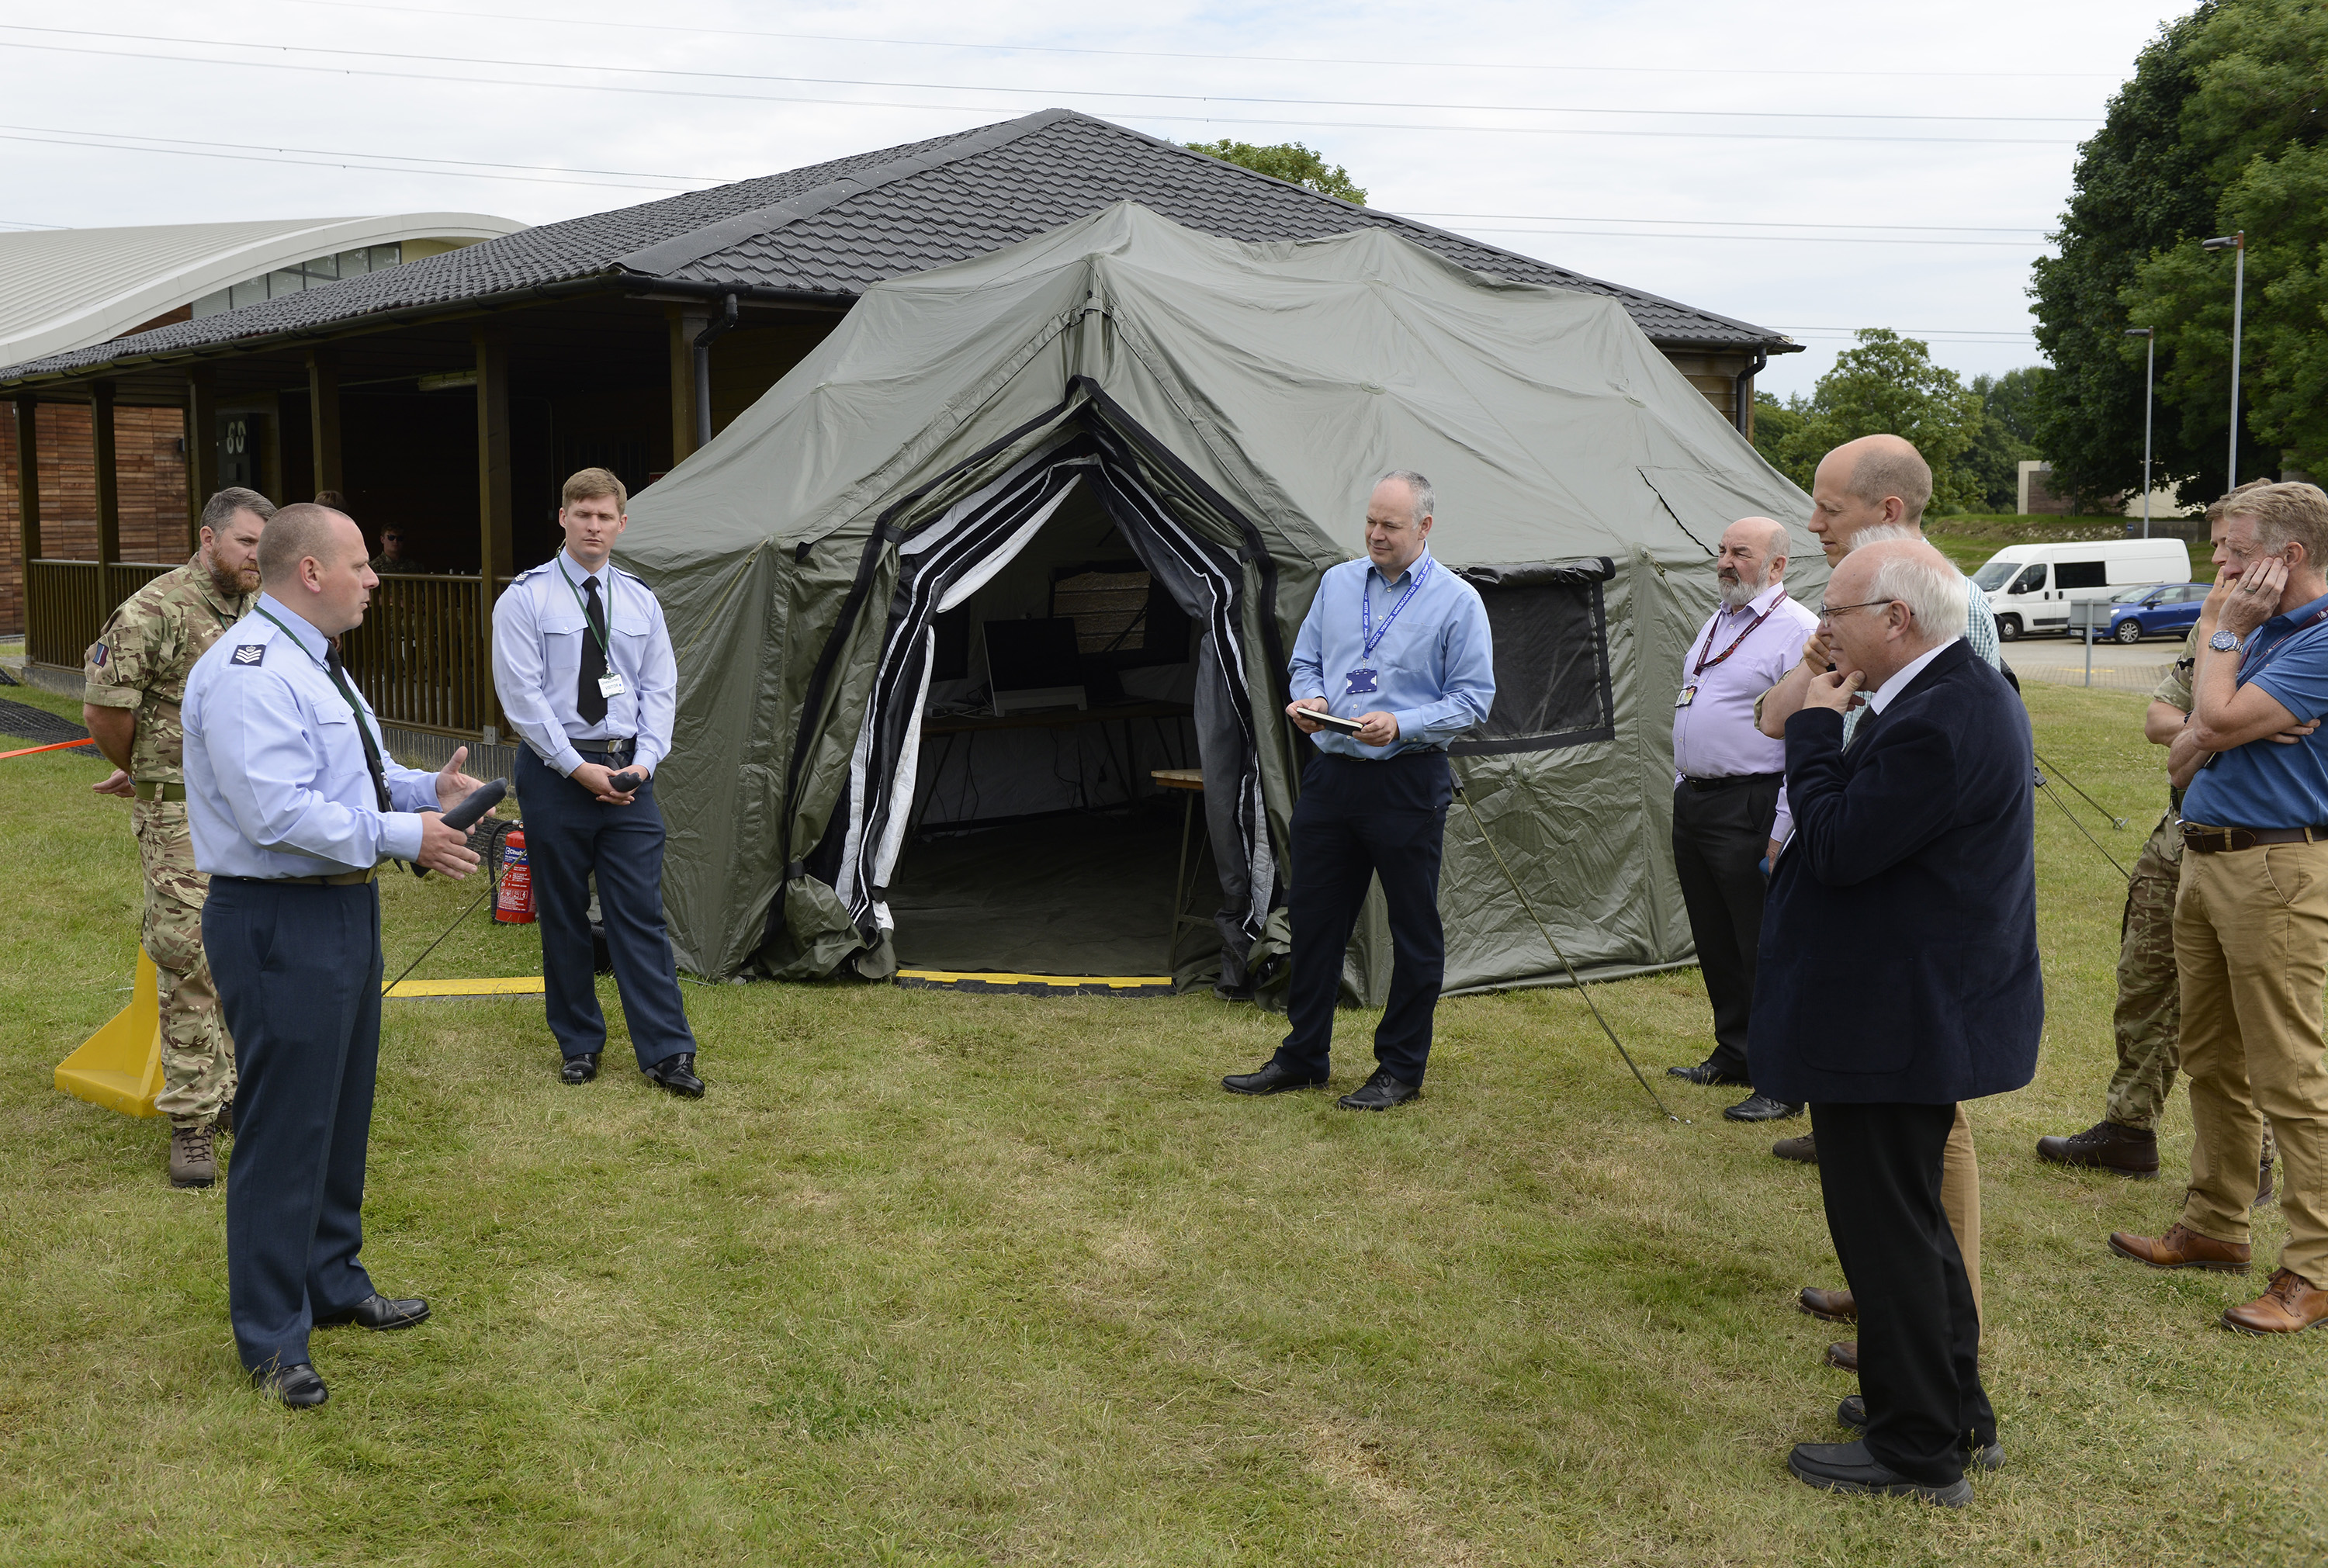 Image shows aviators and civilians outdoors by tent structure.